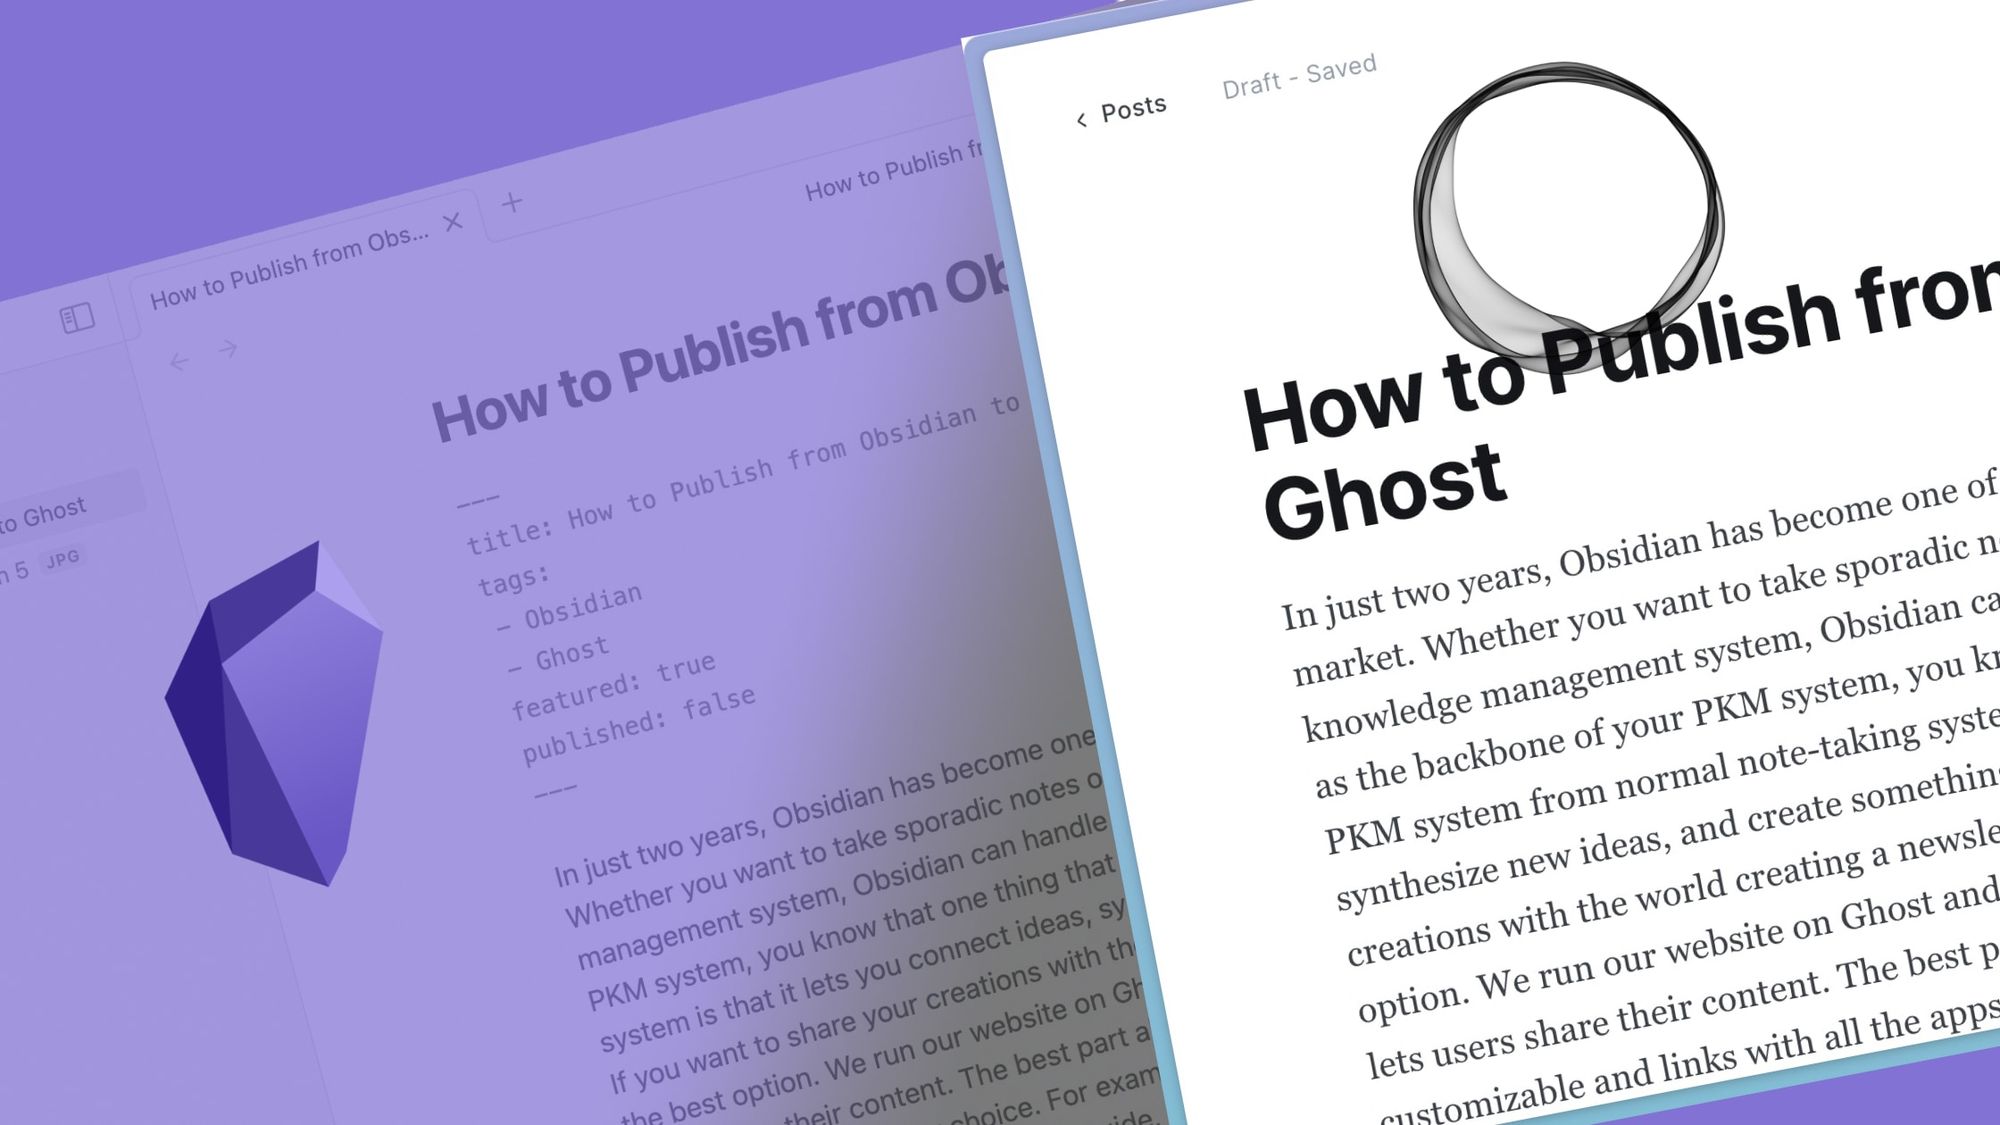 How to Publish from Obsidian to Ghost